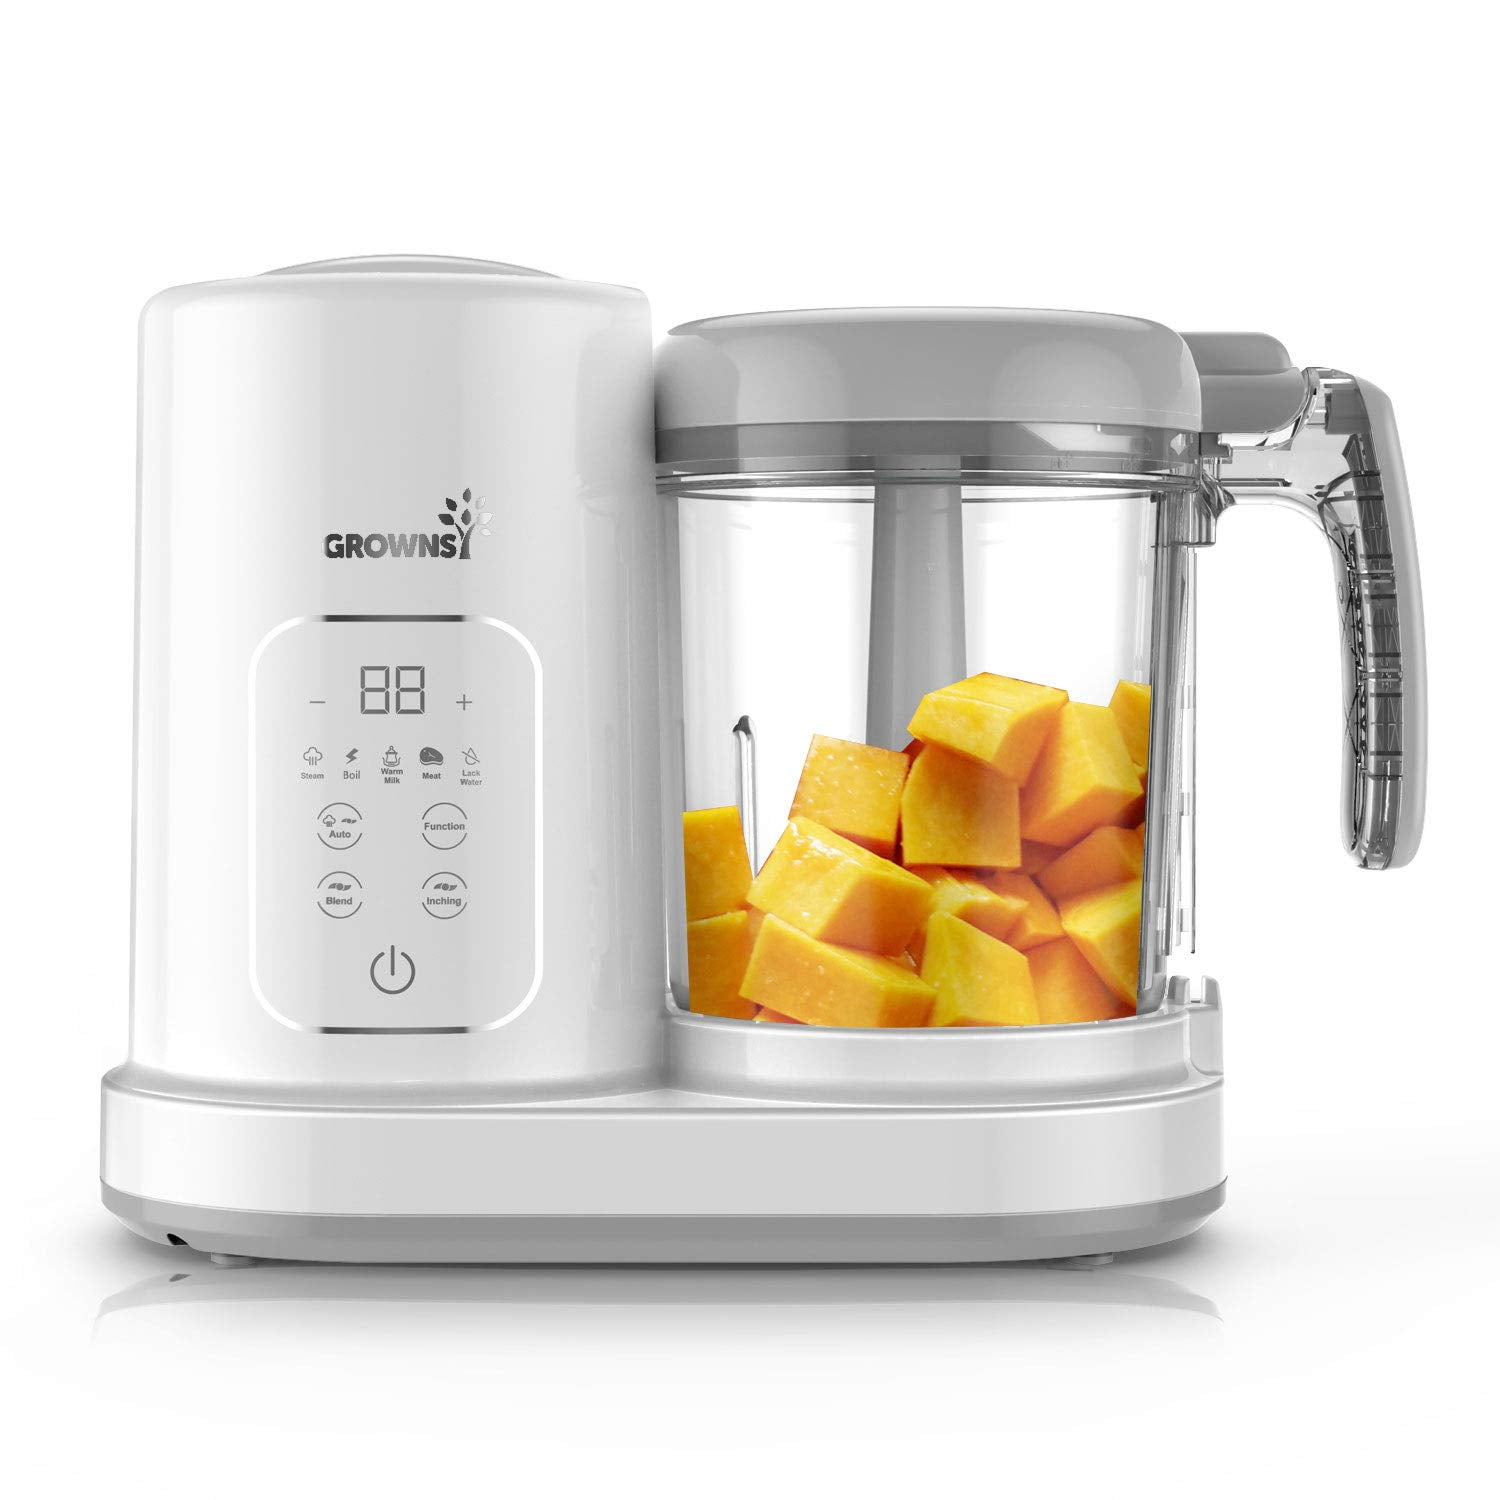 6 Benefits of using a Baby Food Steamer Blender for Weaning